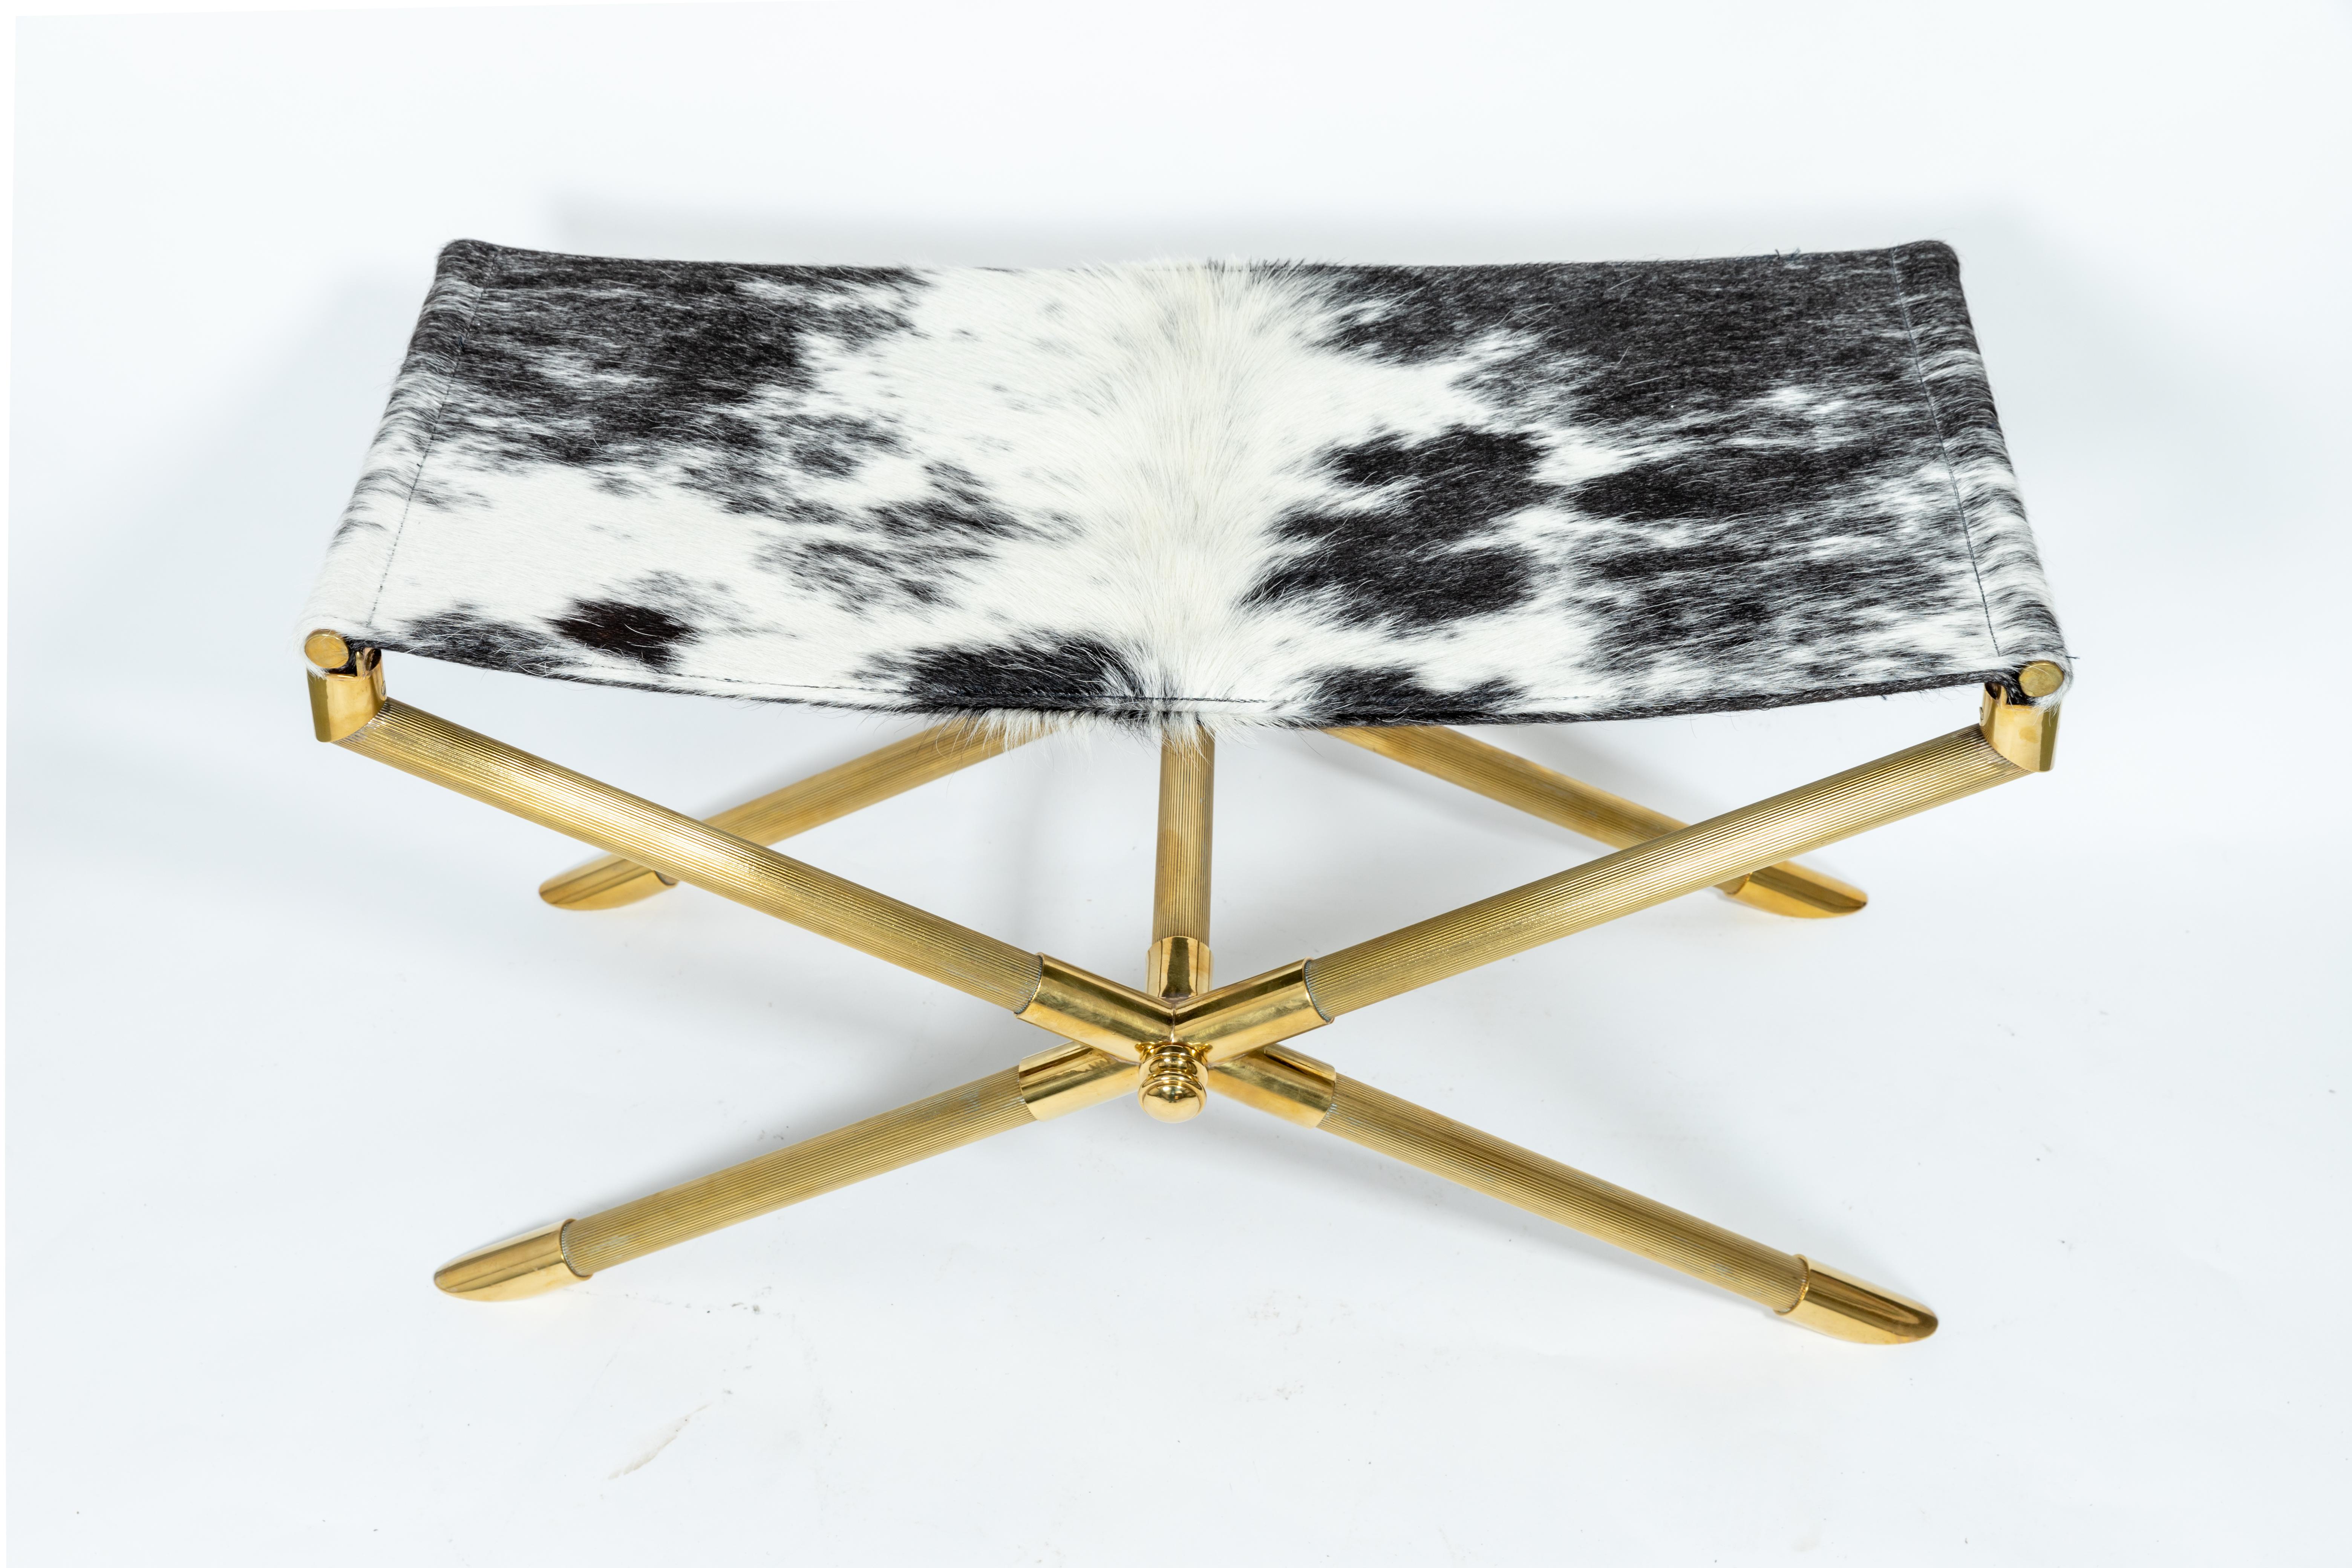 Brass Campaign style bench with cowhide strap seat.